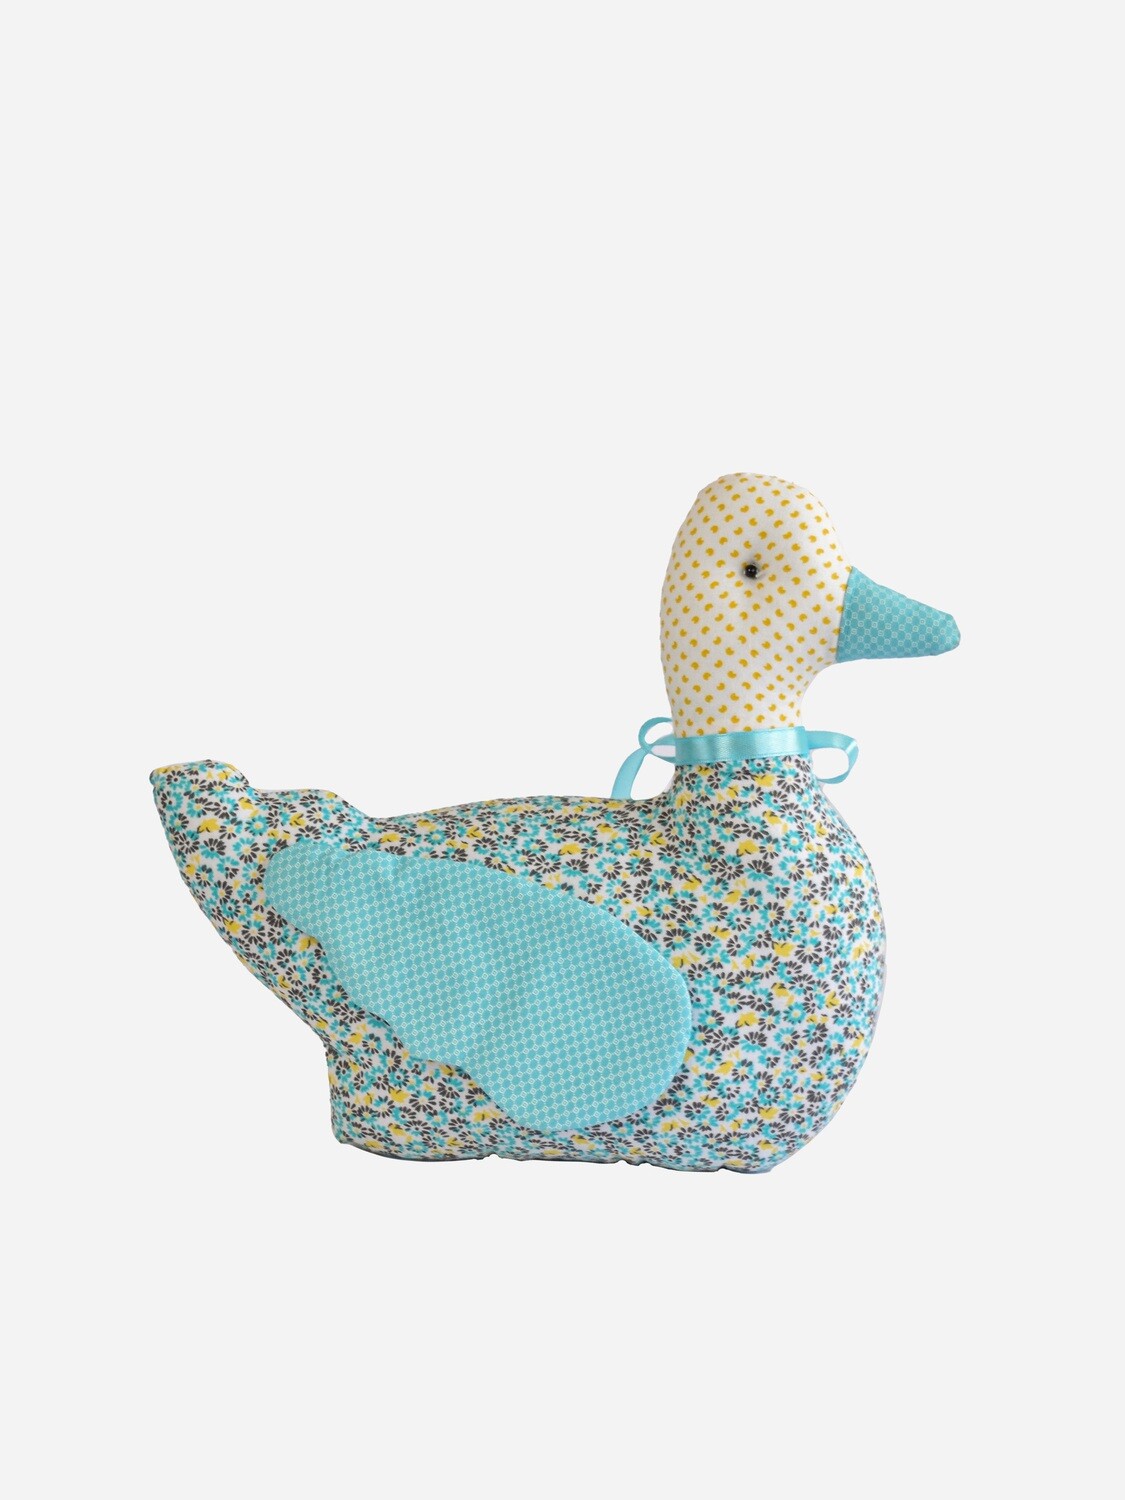 Floral Duck with turquoise wings and beak, Medium